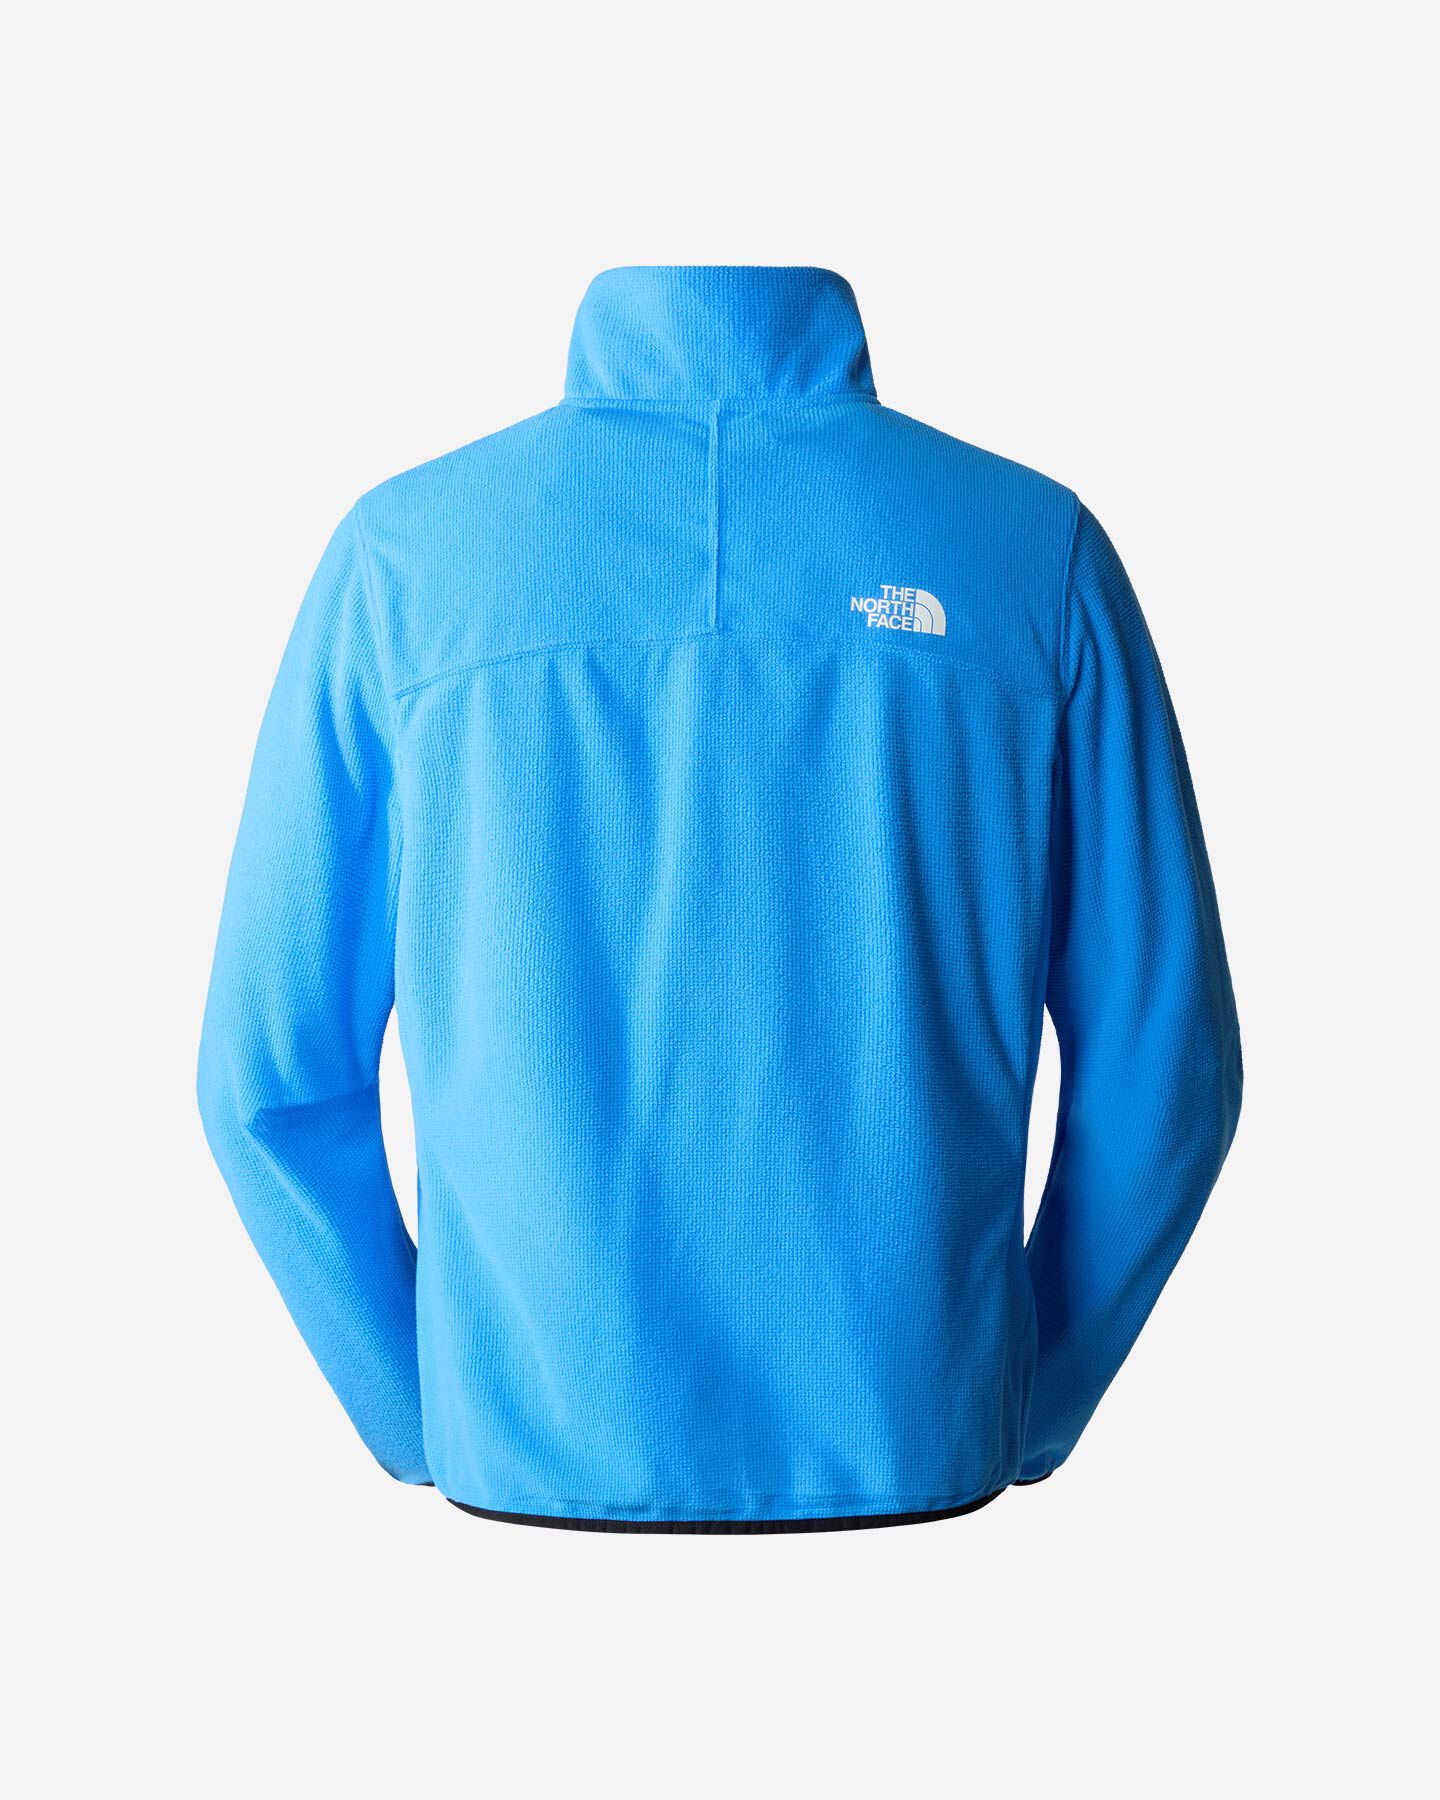  Pile THE NORTH FACE EXPERIT GRID M S5599053|KPI|M scatto 1